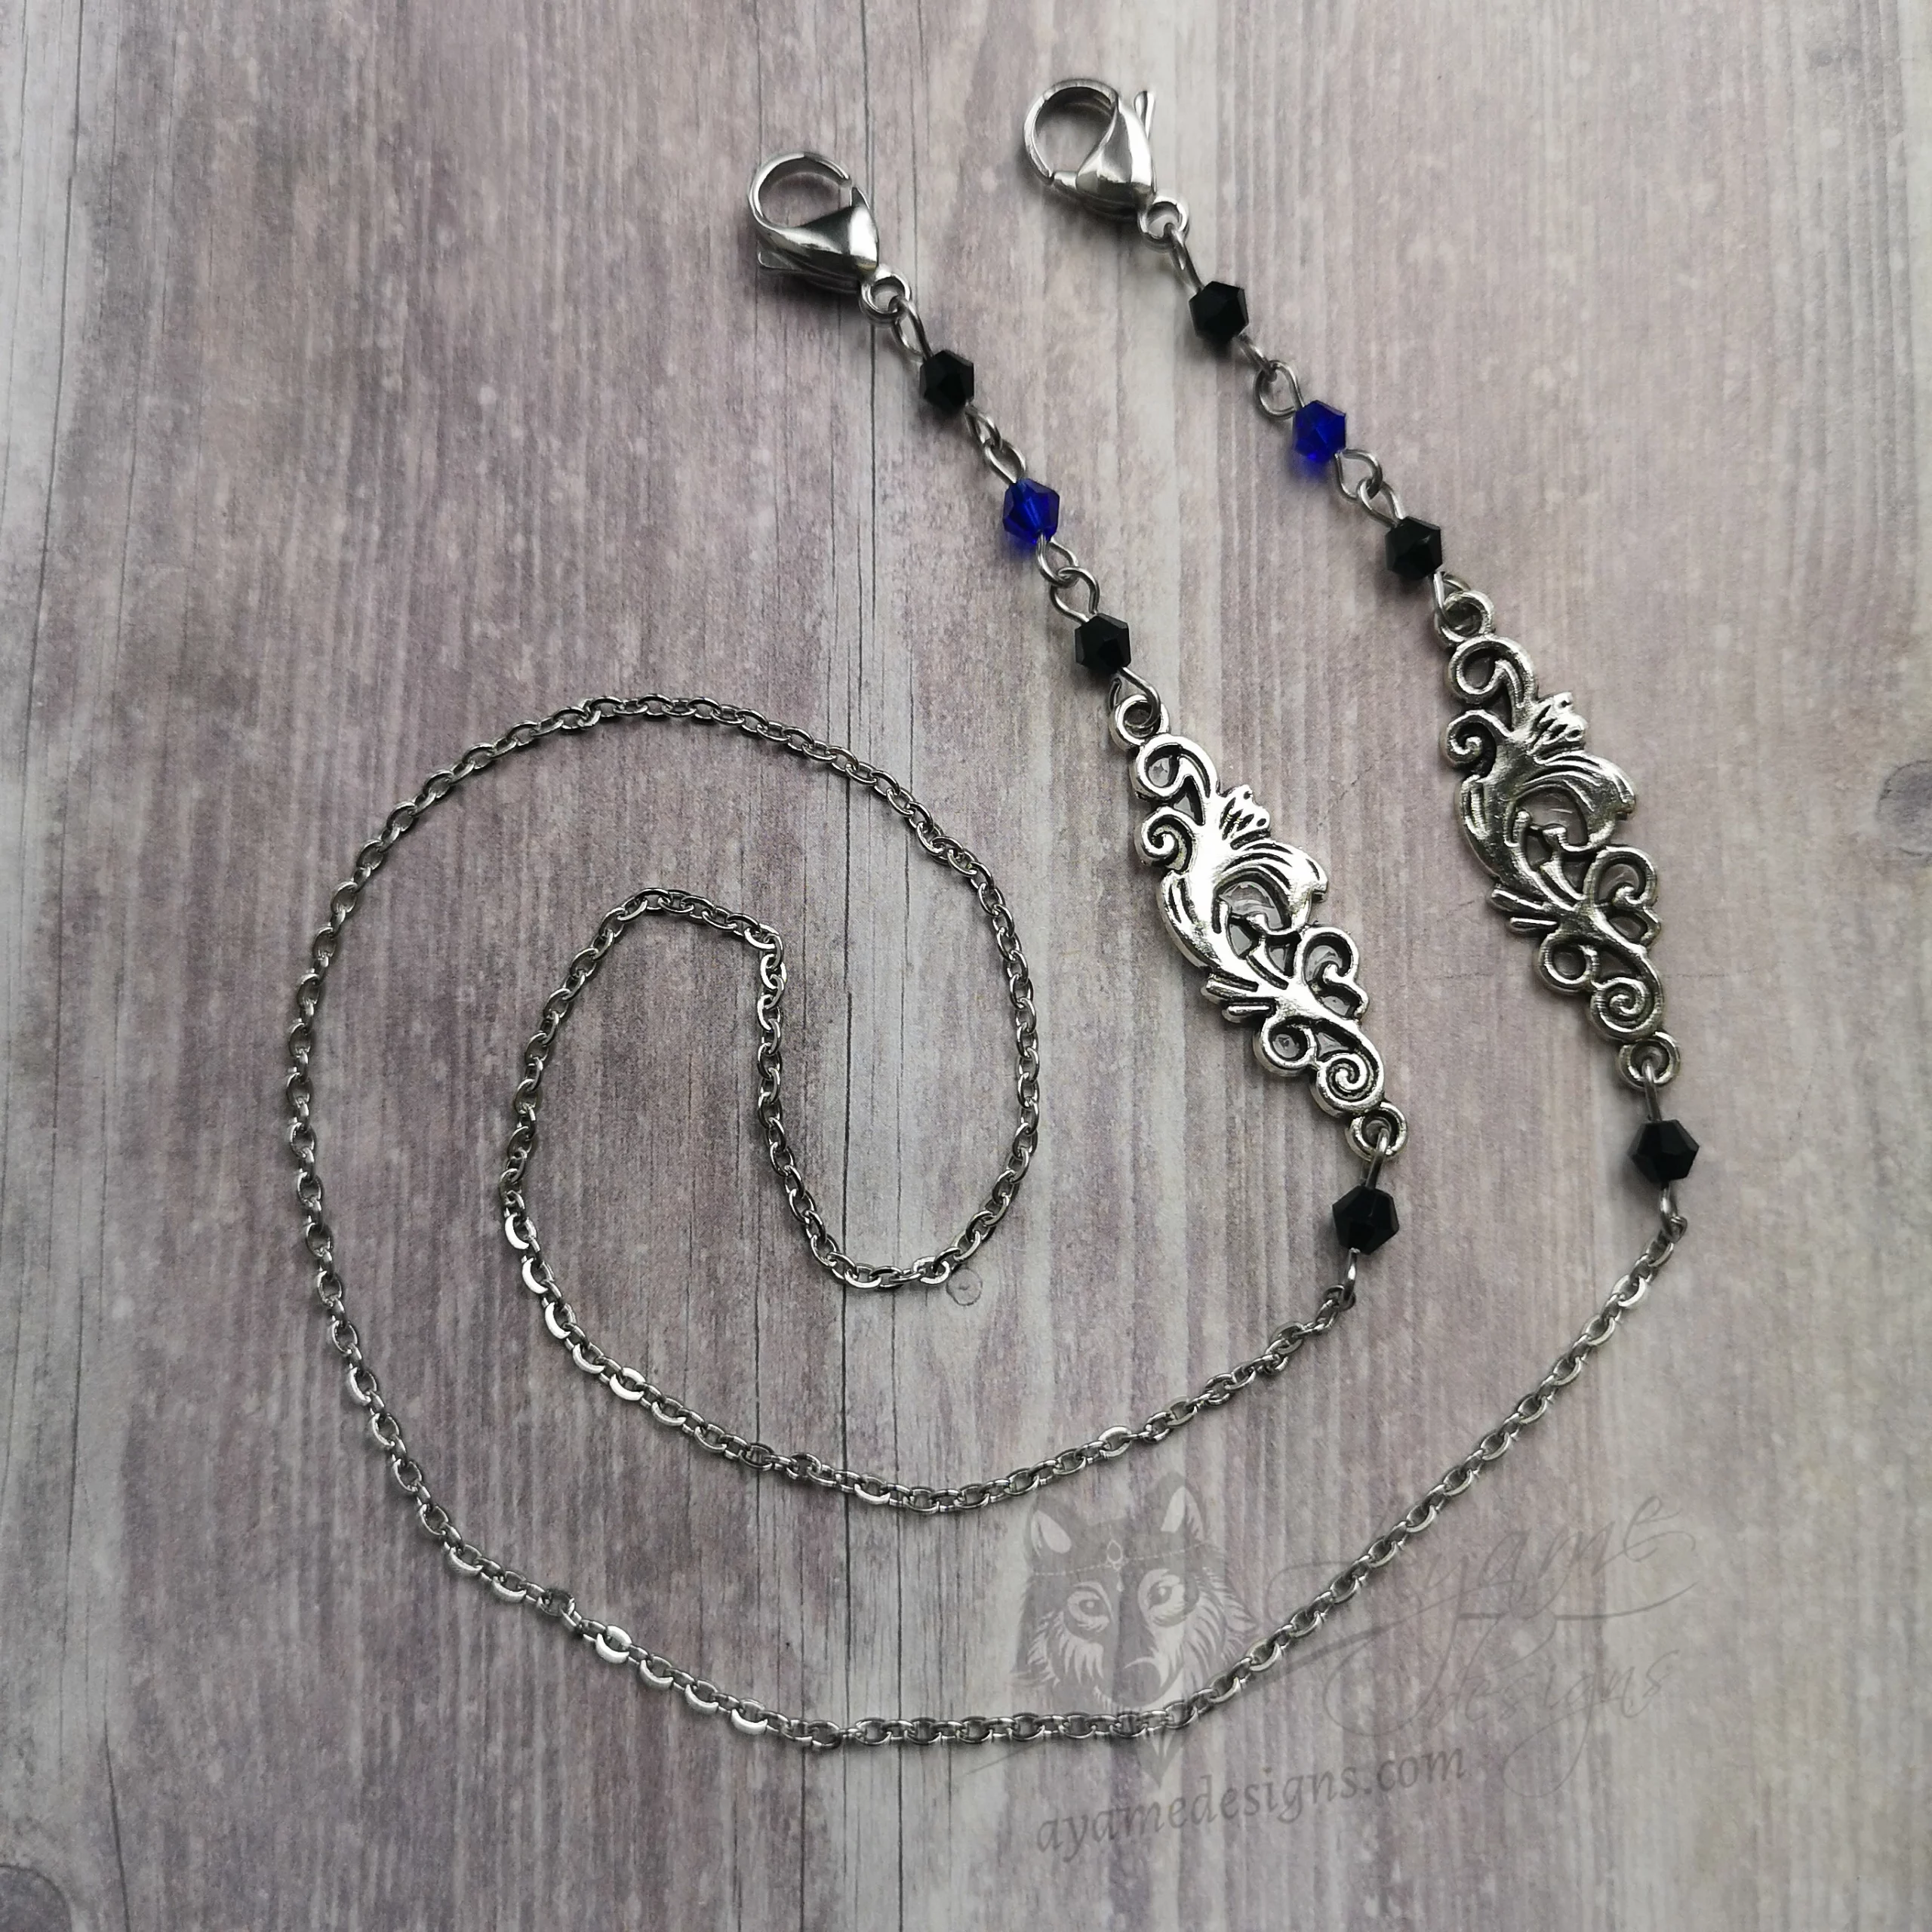 Handmade gothic mask chain with filigree charms, blue and black Austrian crystal beads and stainless steel chain